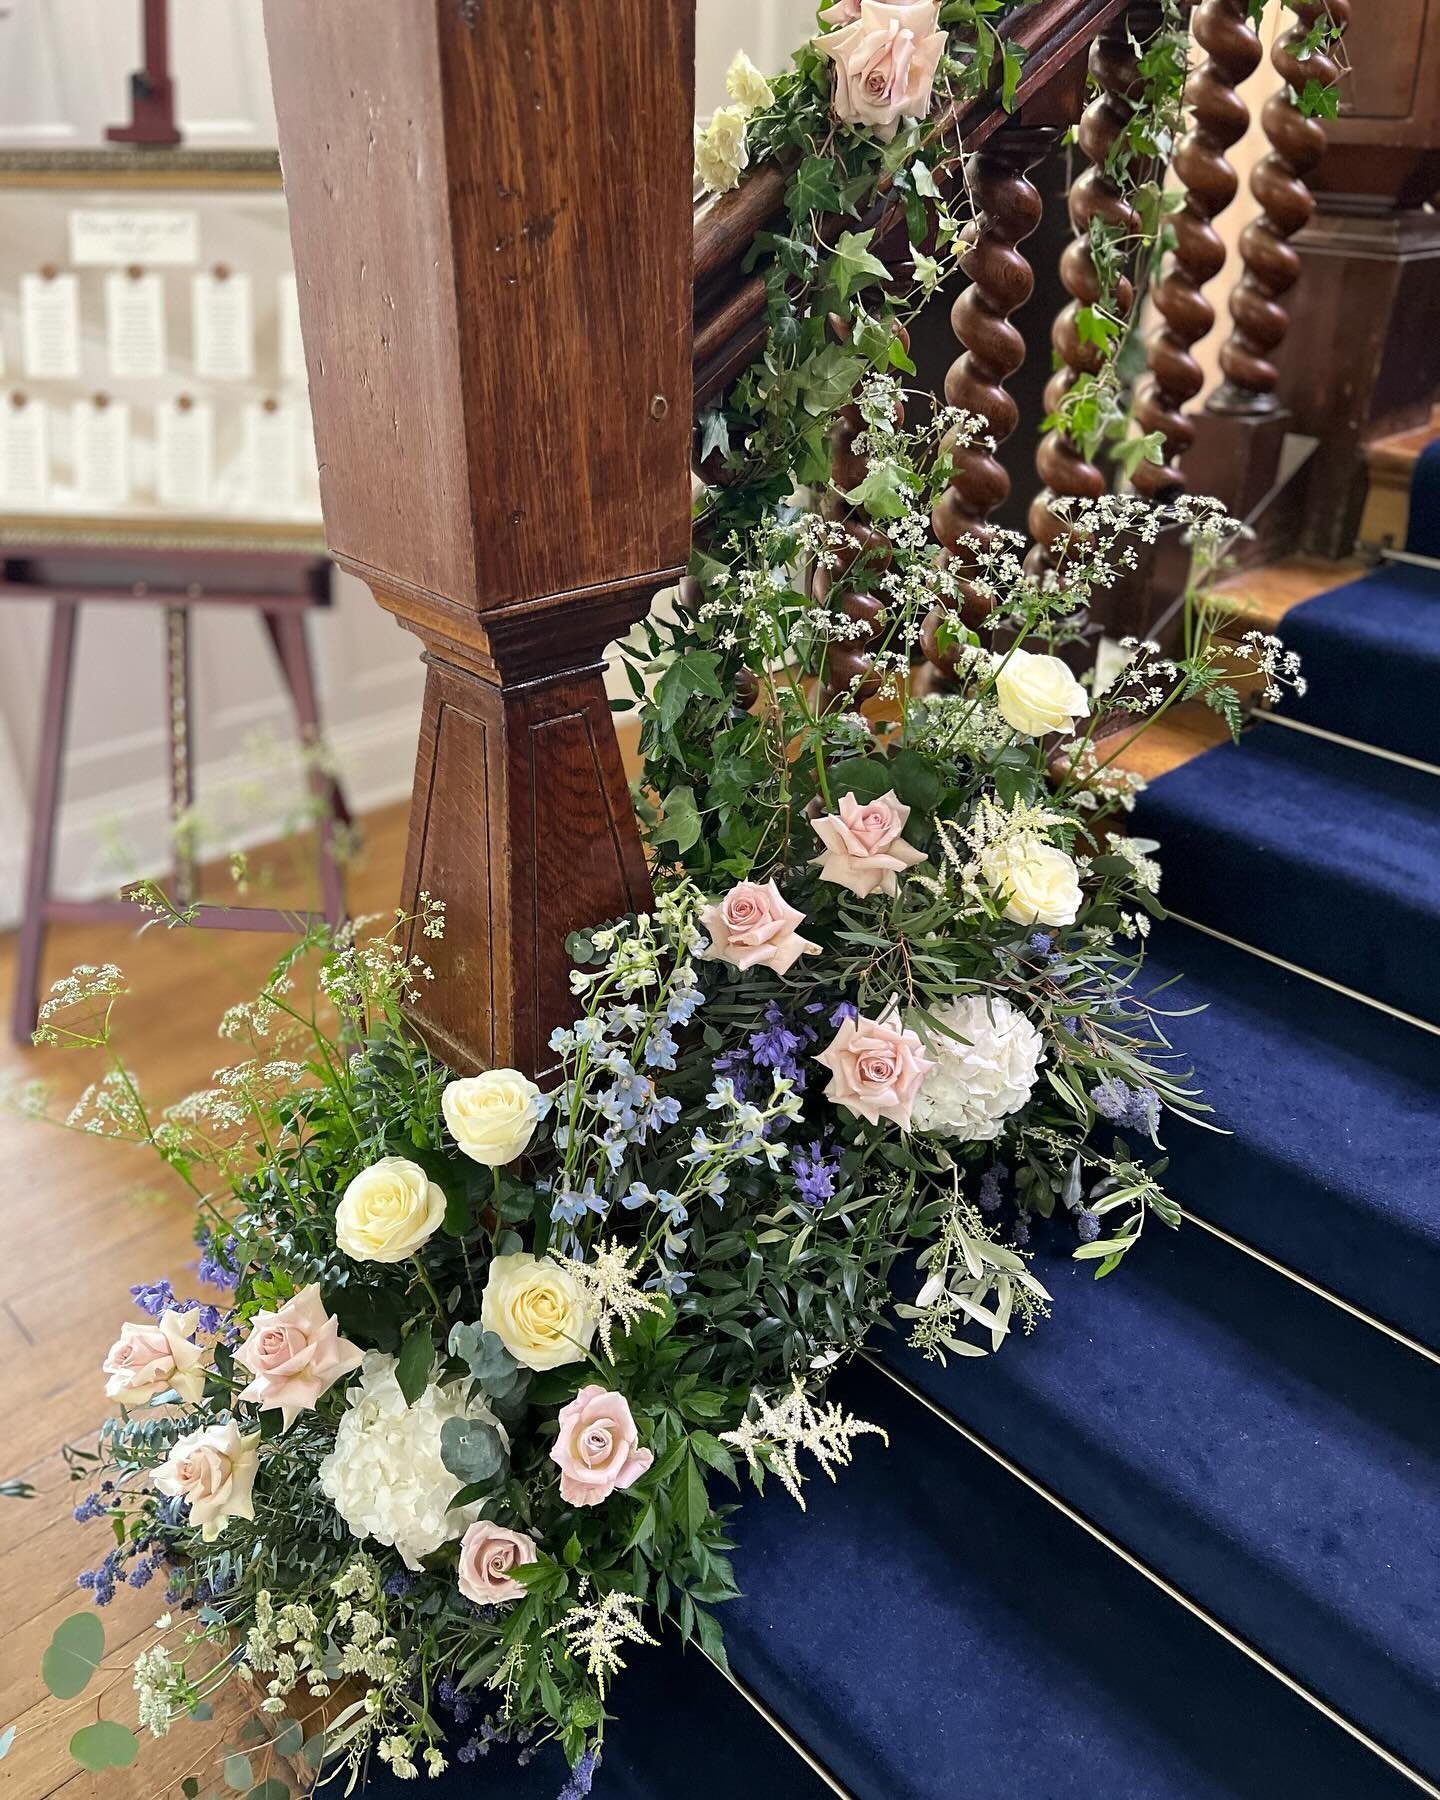 Stair meadow details @highley_manor_sussex. White, blush and blue florals to decorate the staircase. 
.
.
.
.
.
.

#surreyflowers
#surreyflorist
#weddingfloristsurrey
#weddingflowerssurrey
#weddingflowerslondon
#weddingfloristlondon
#londonflorist
#s